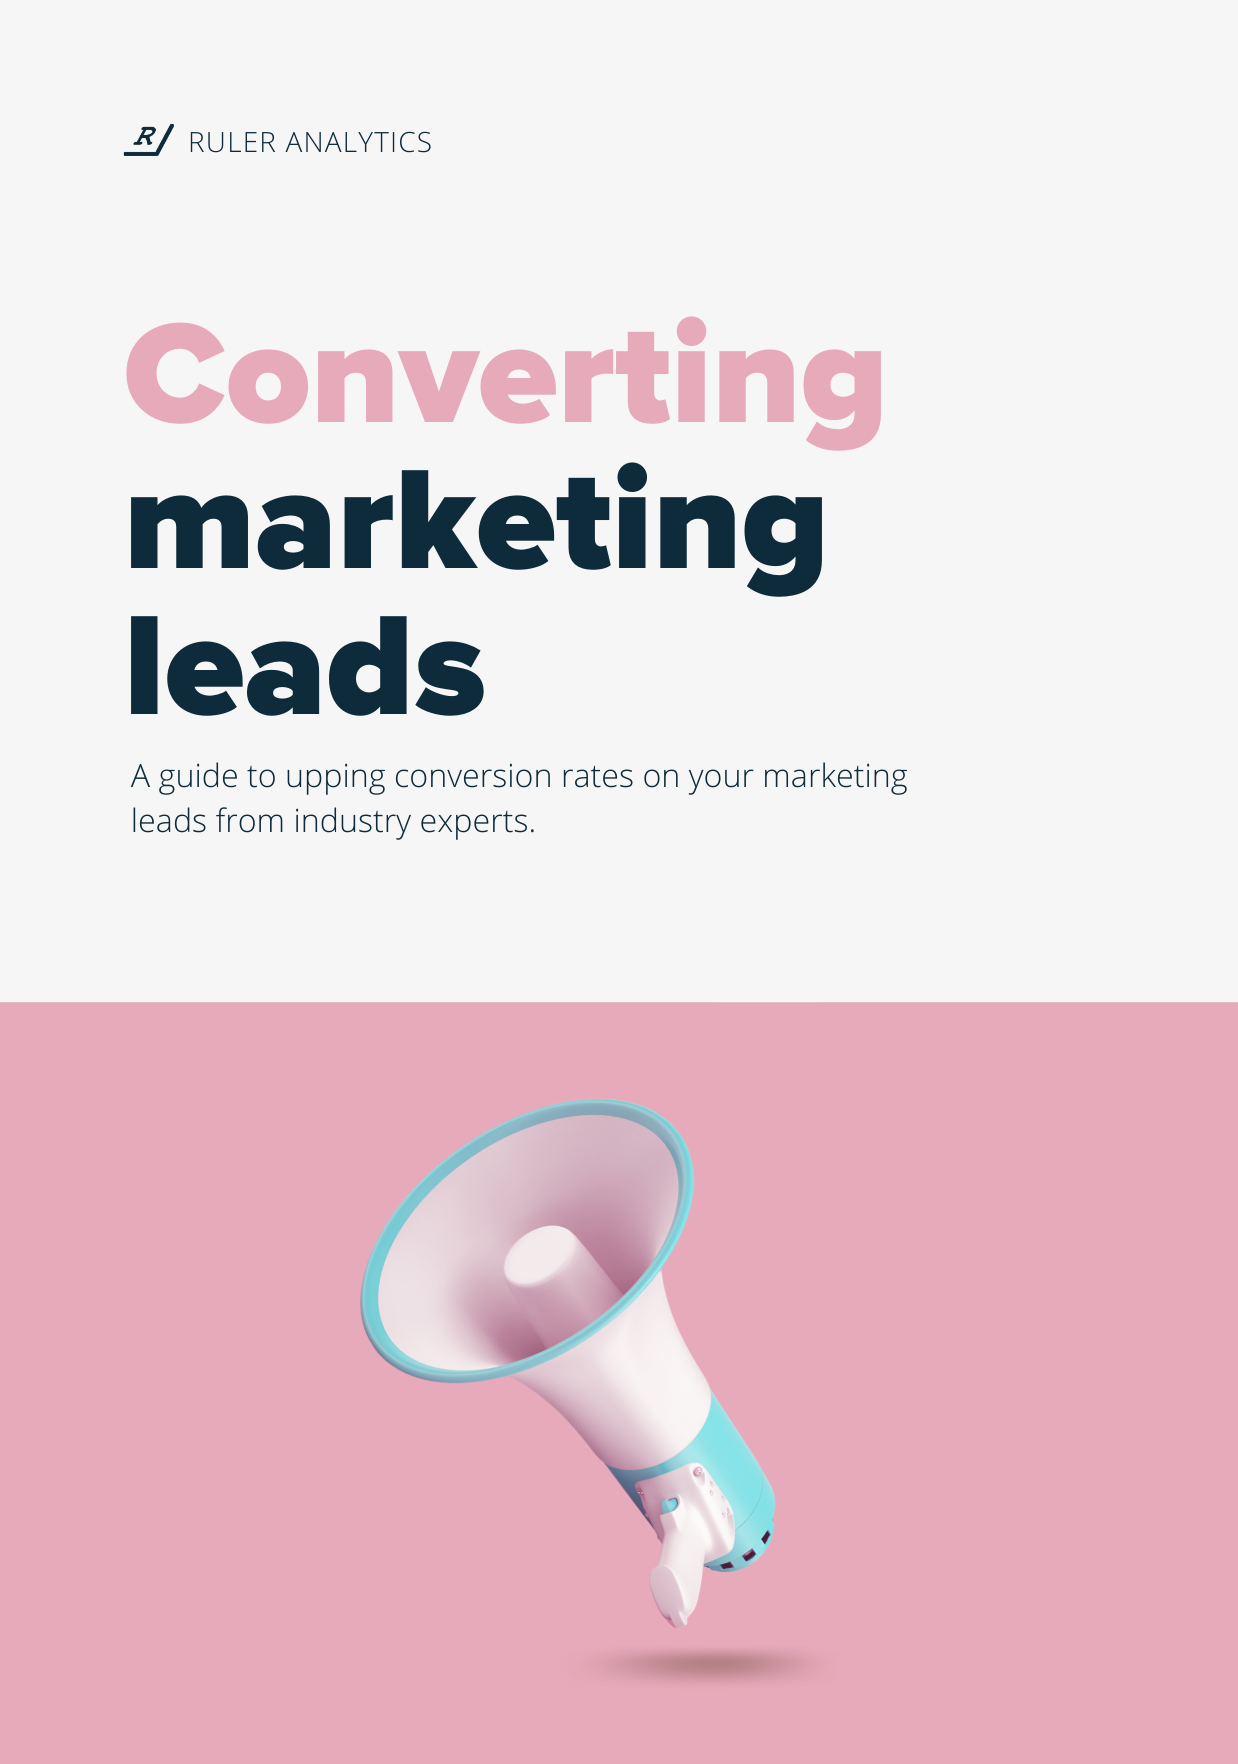 Converting Marketing Leads to Sales